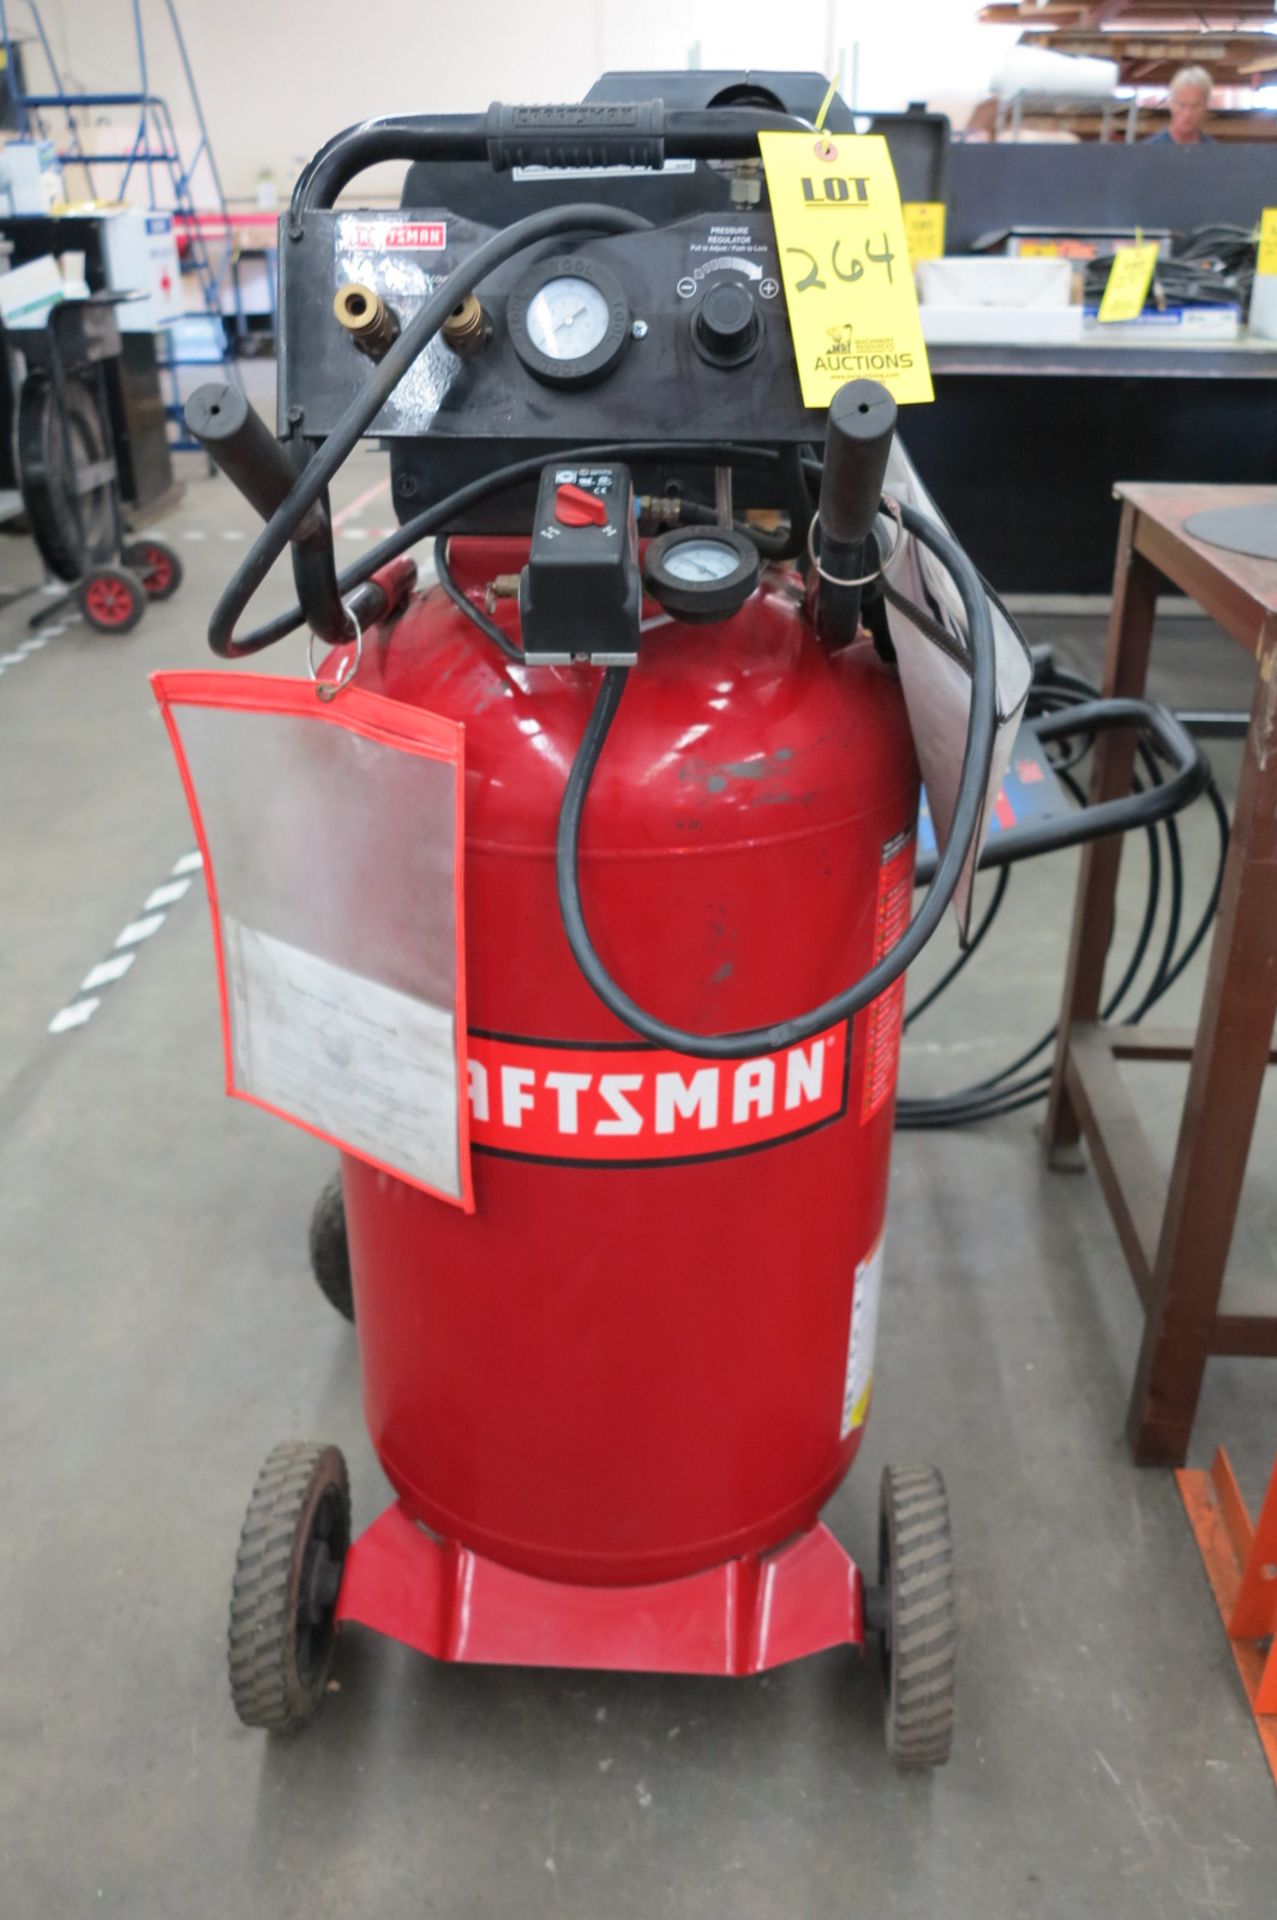 CRAFTSMAN 150 PSI PORTABLE AIR COMPRESSOR WITH 33 GAL TANK, 1.6 HP, DIRECT DRIVE, OIL FREE - Image 2 of 2